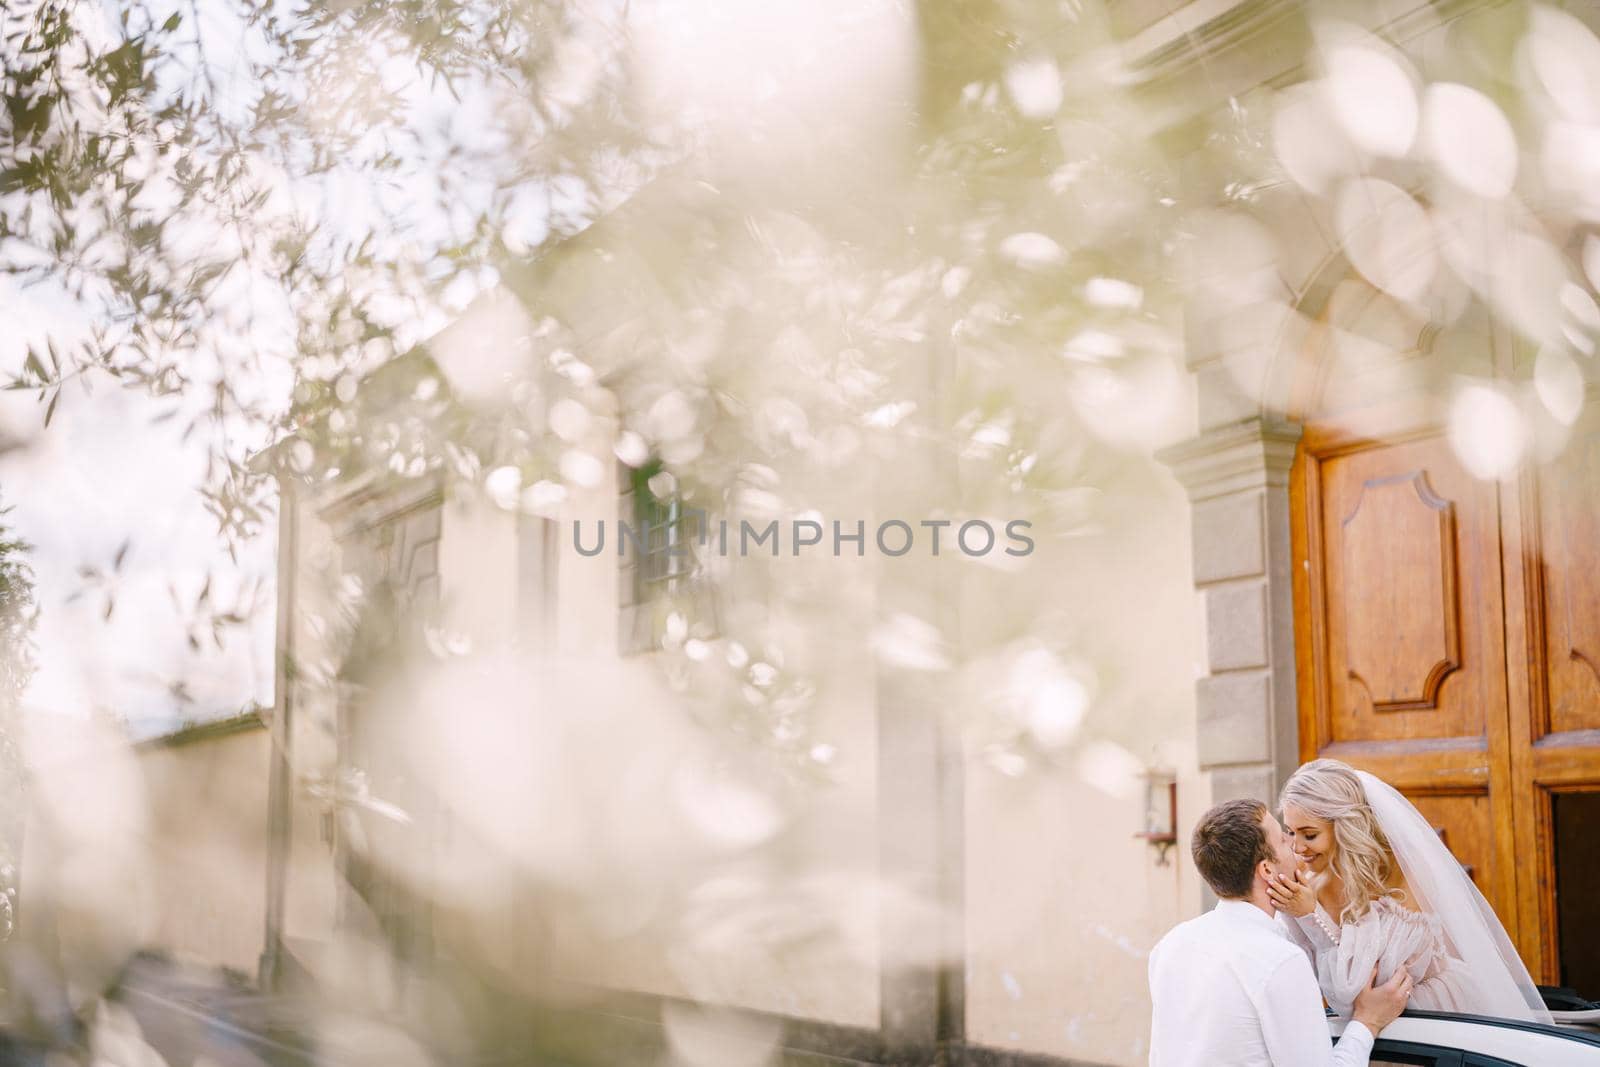 Wedding in Florence, Italy, in an old villa-winery. The bride peeks out of the convertible and kisses the groom.